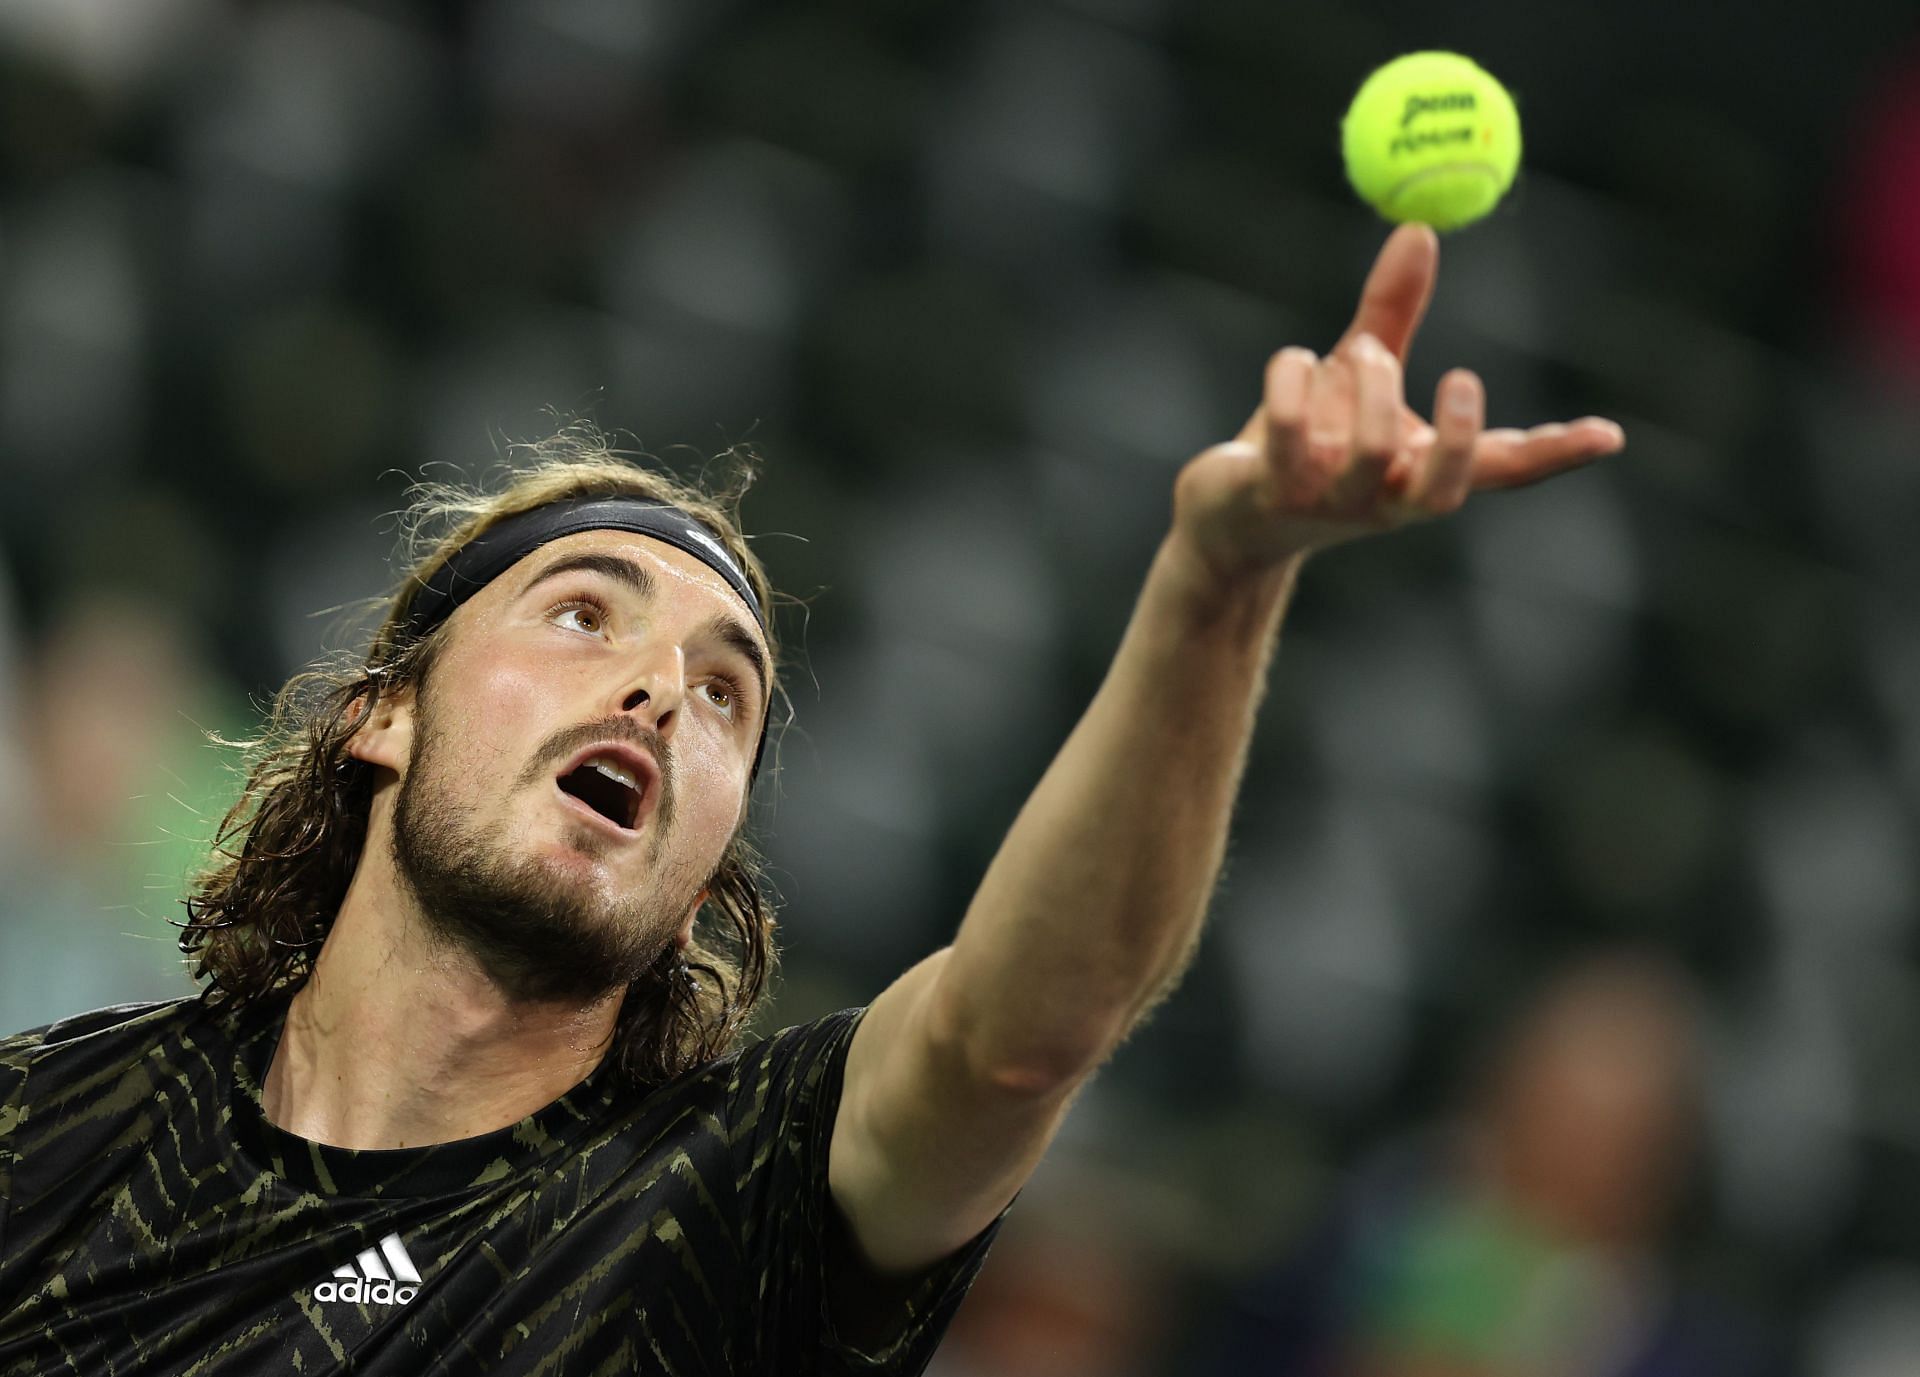 Stefanos Tsitsipas in action at the BNP Paribas Open - Day 10